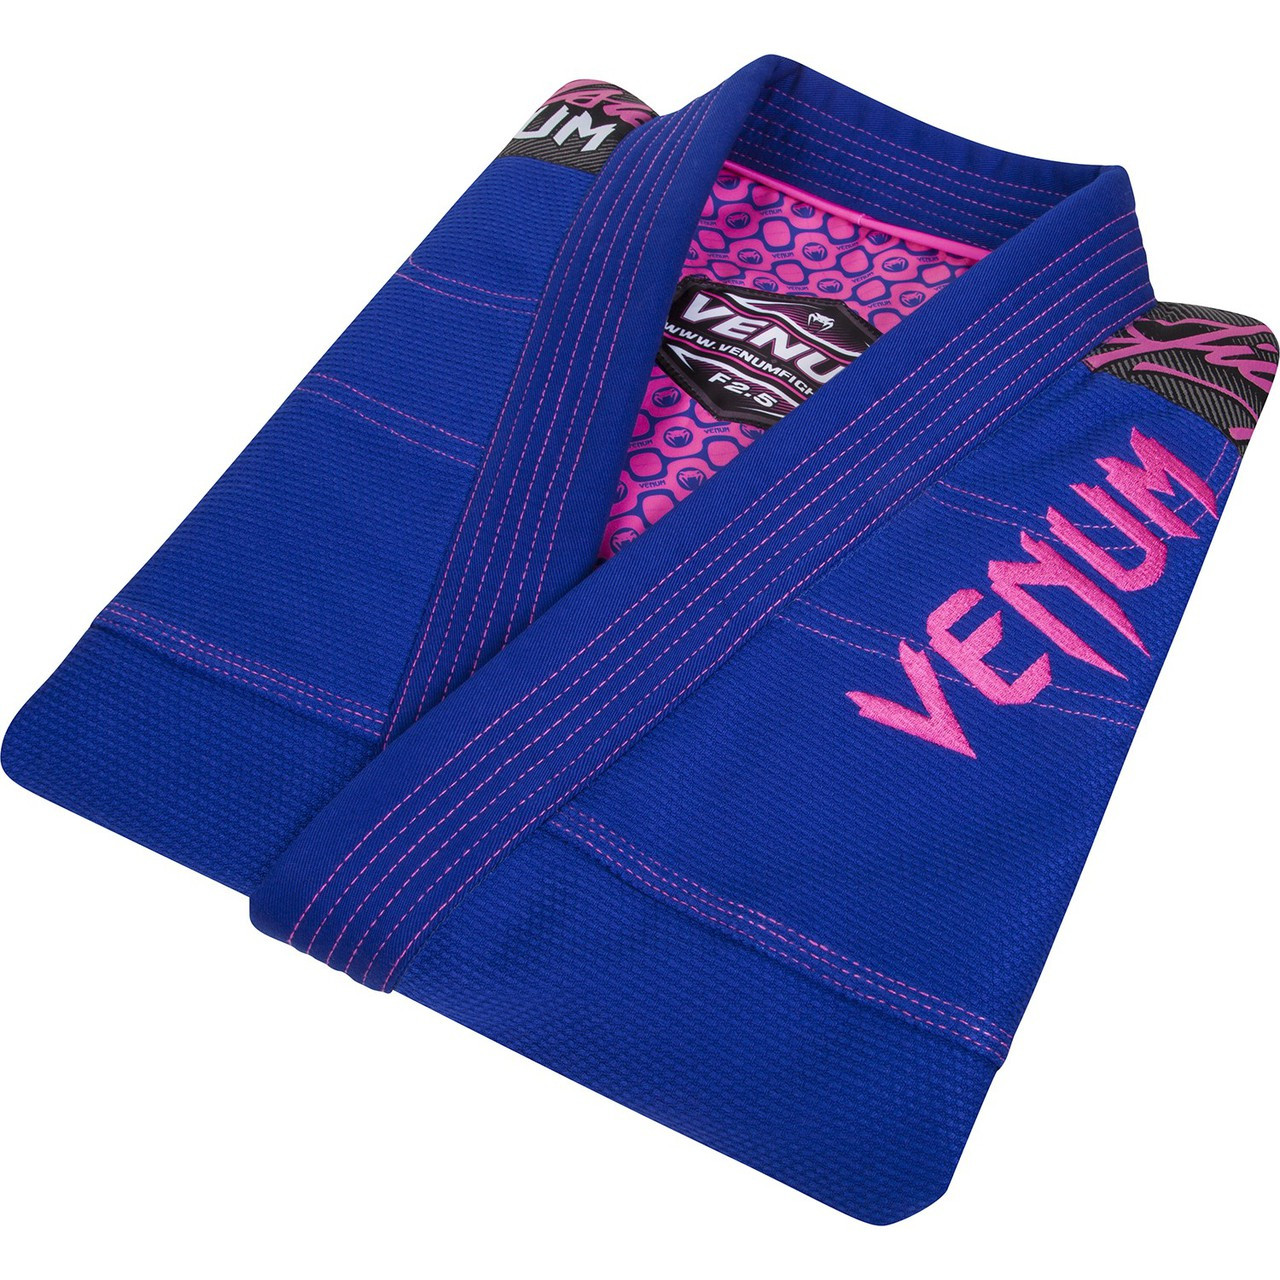 Venum Challenger 2.0 Female Gi Blue and pink.  The new Female challenger 2.0 gi is available in blue at www.thejiujitsushop.com 

Enjoy free shipping from The Jiu Jitsu Shop.  Top BJJ gear from the best brands at low prices and free shipping for men, women and kids.